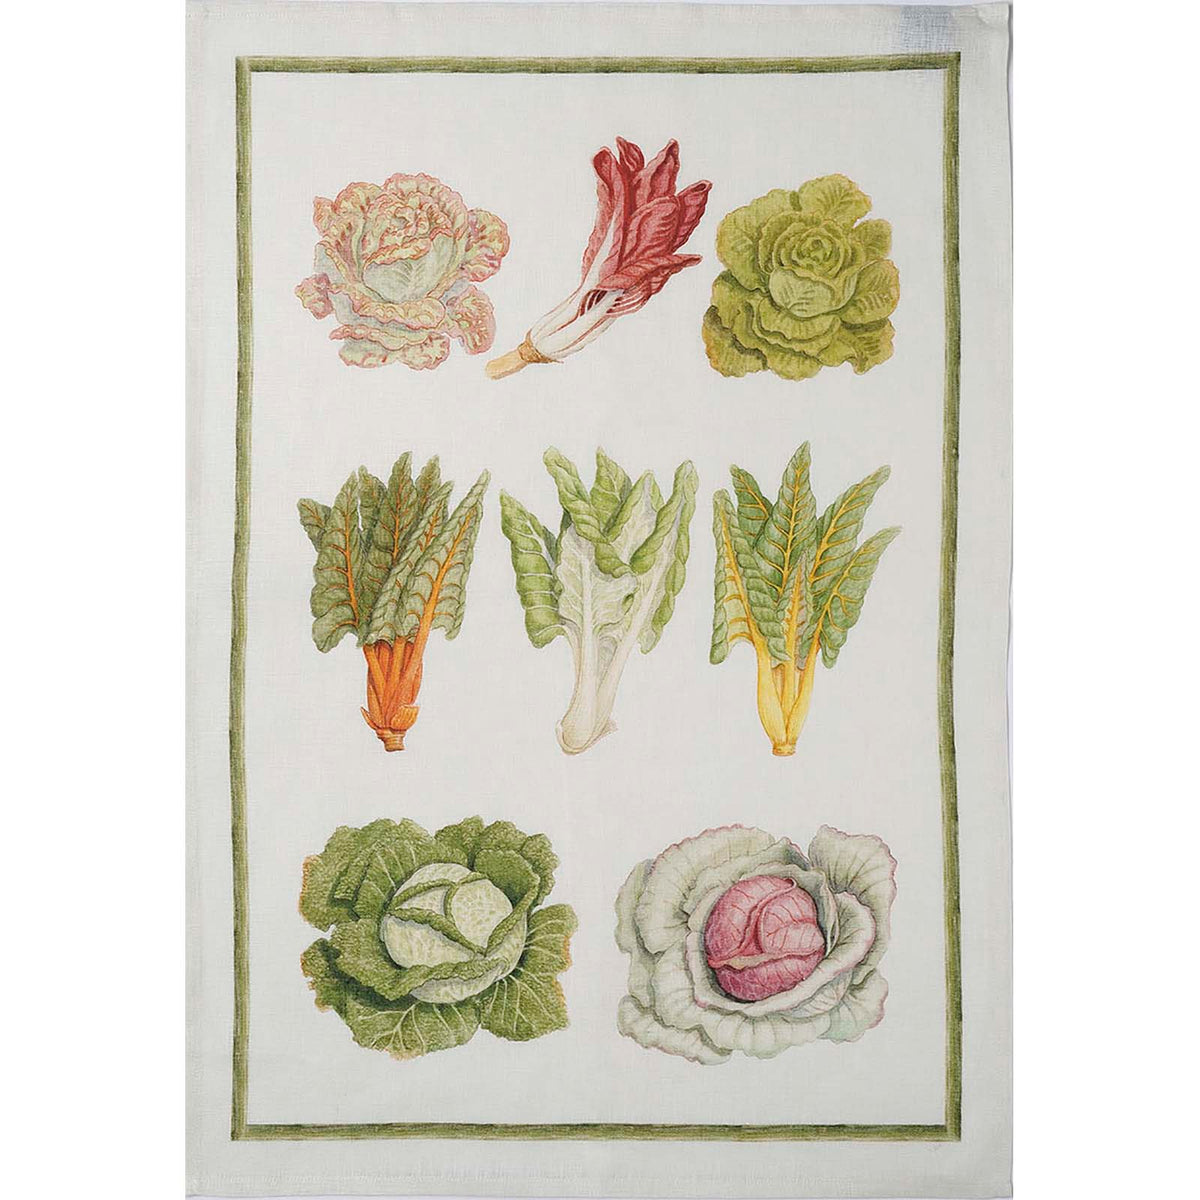 Veggies Kitchen Towel with Lettuces in Watercolor on Italian Linen. Part of a Set of 2 sold by Caskata